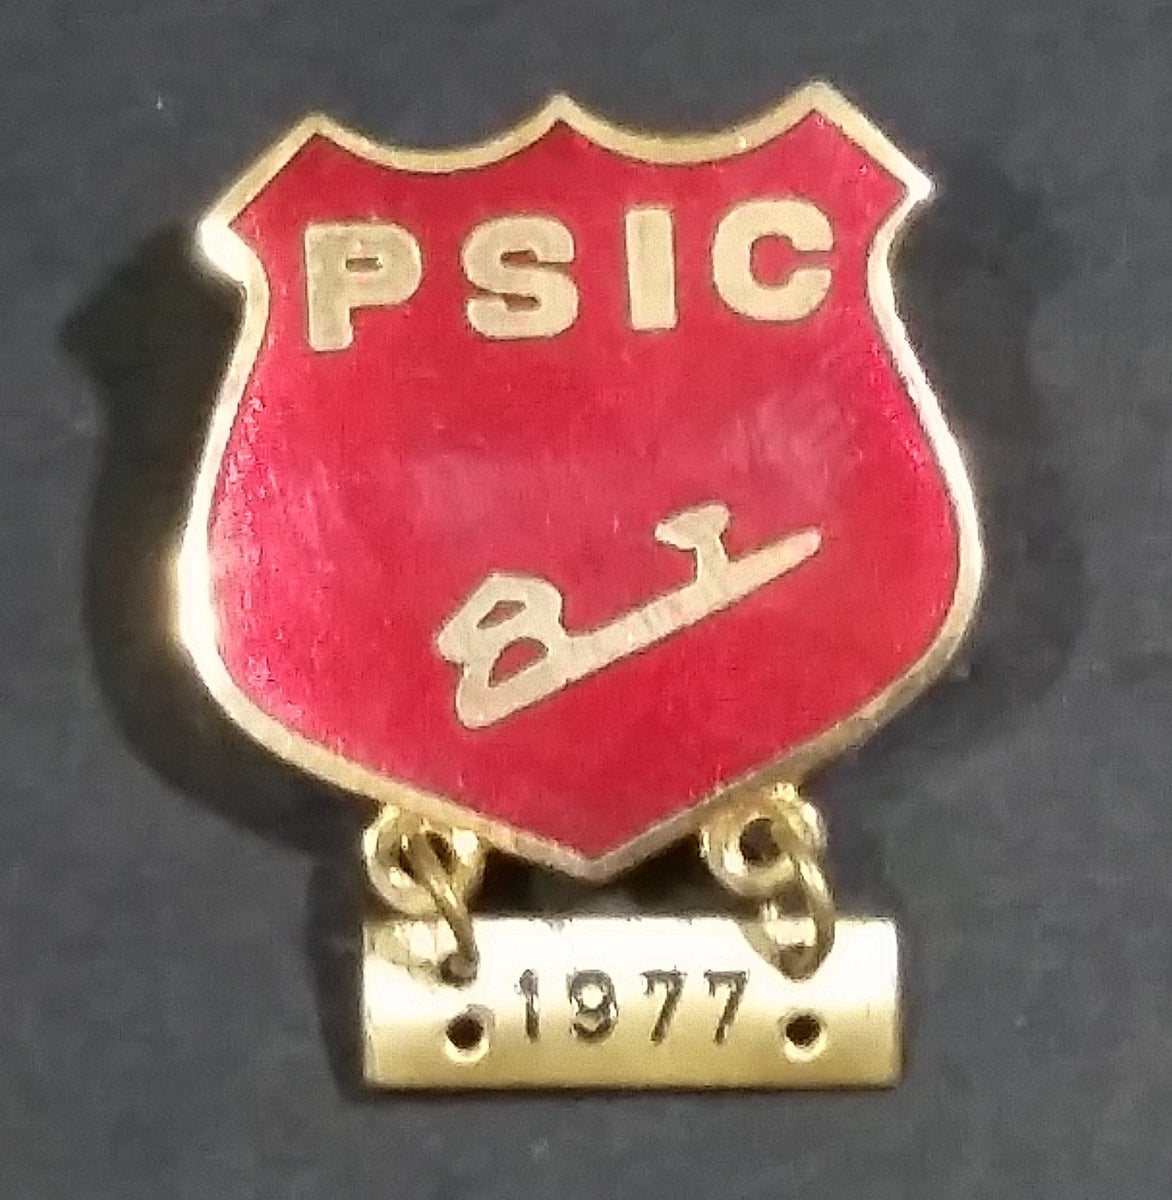 1977 PSIC Red Crest Enamel Ice Skating Pin – Treasure Valley Antiques ...